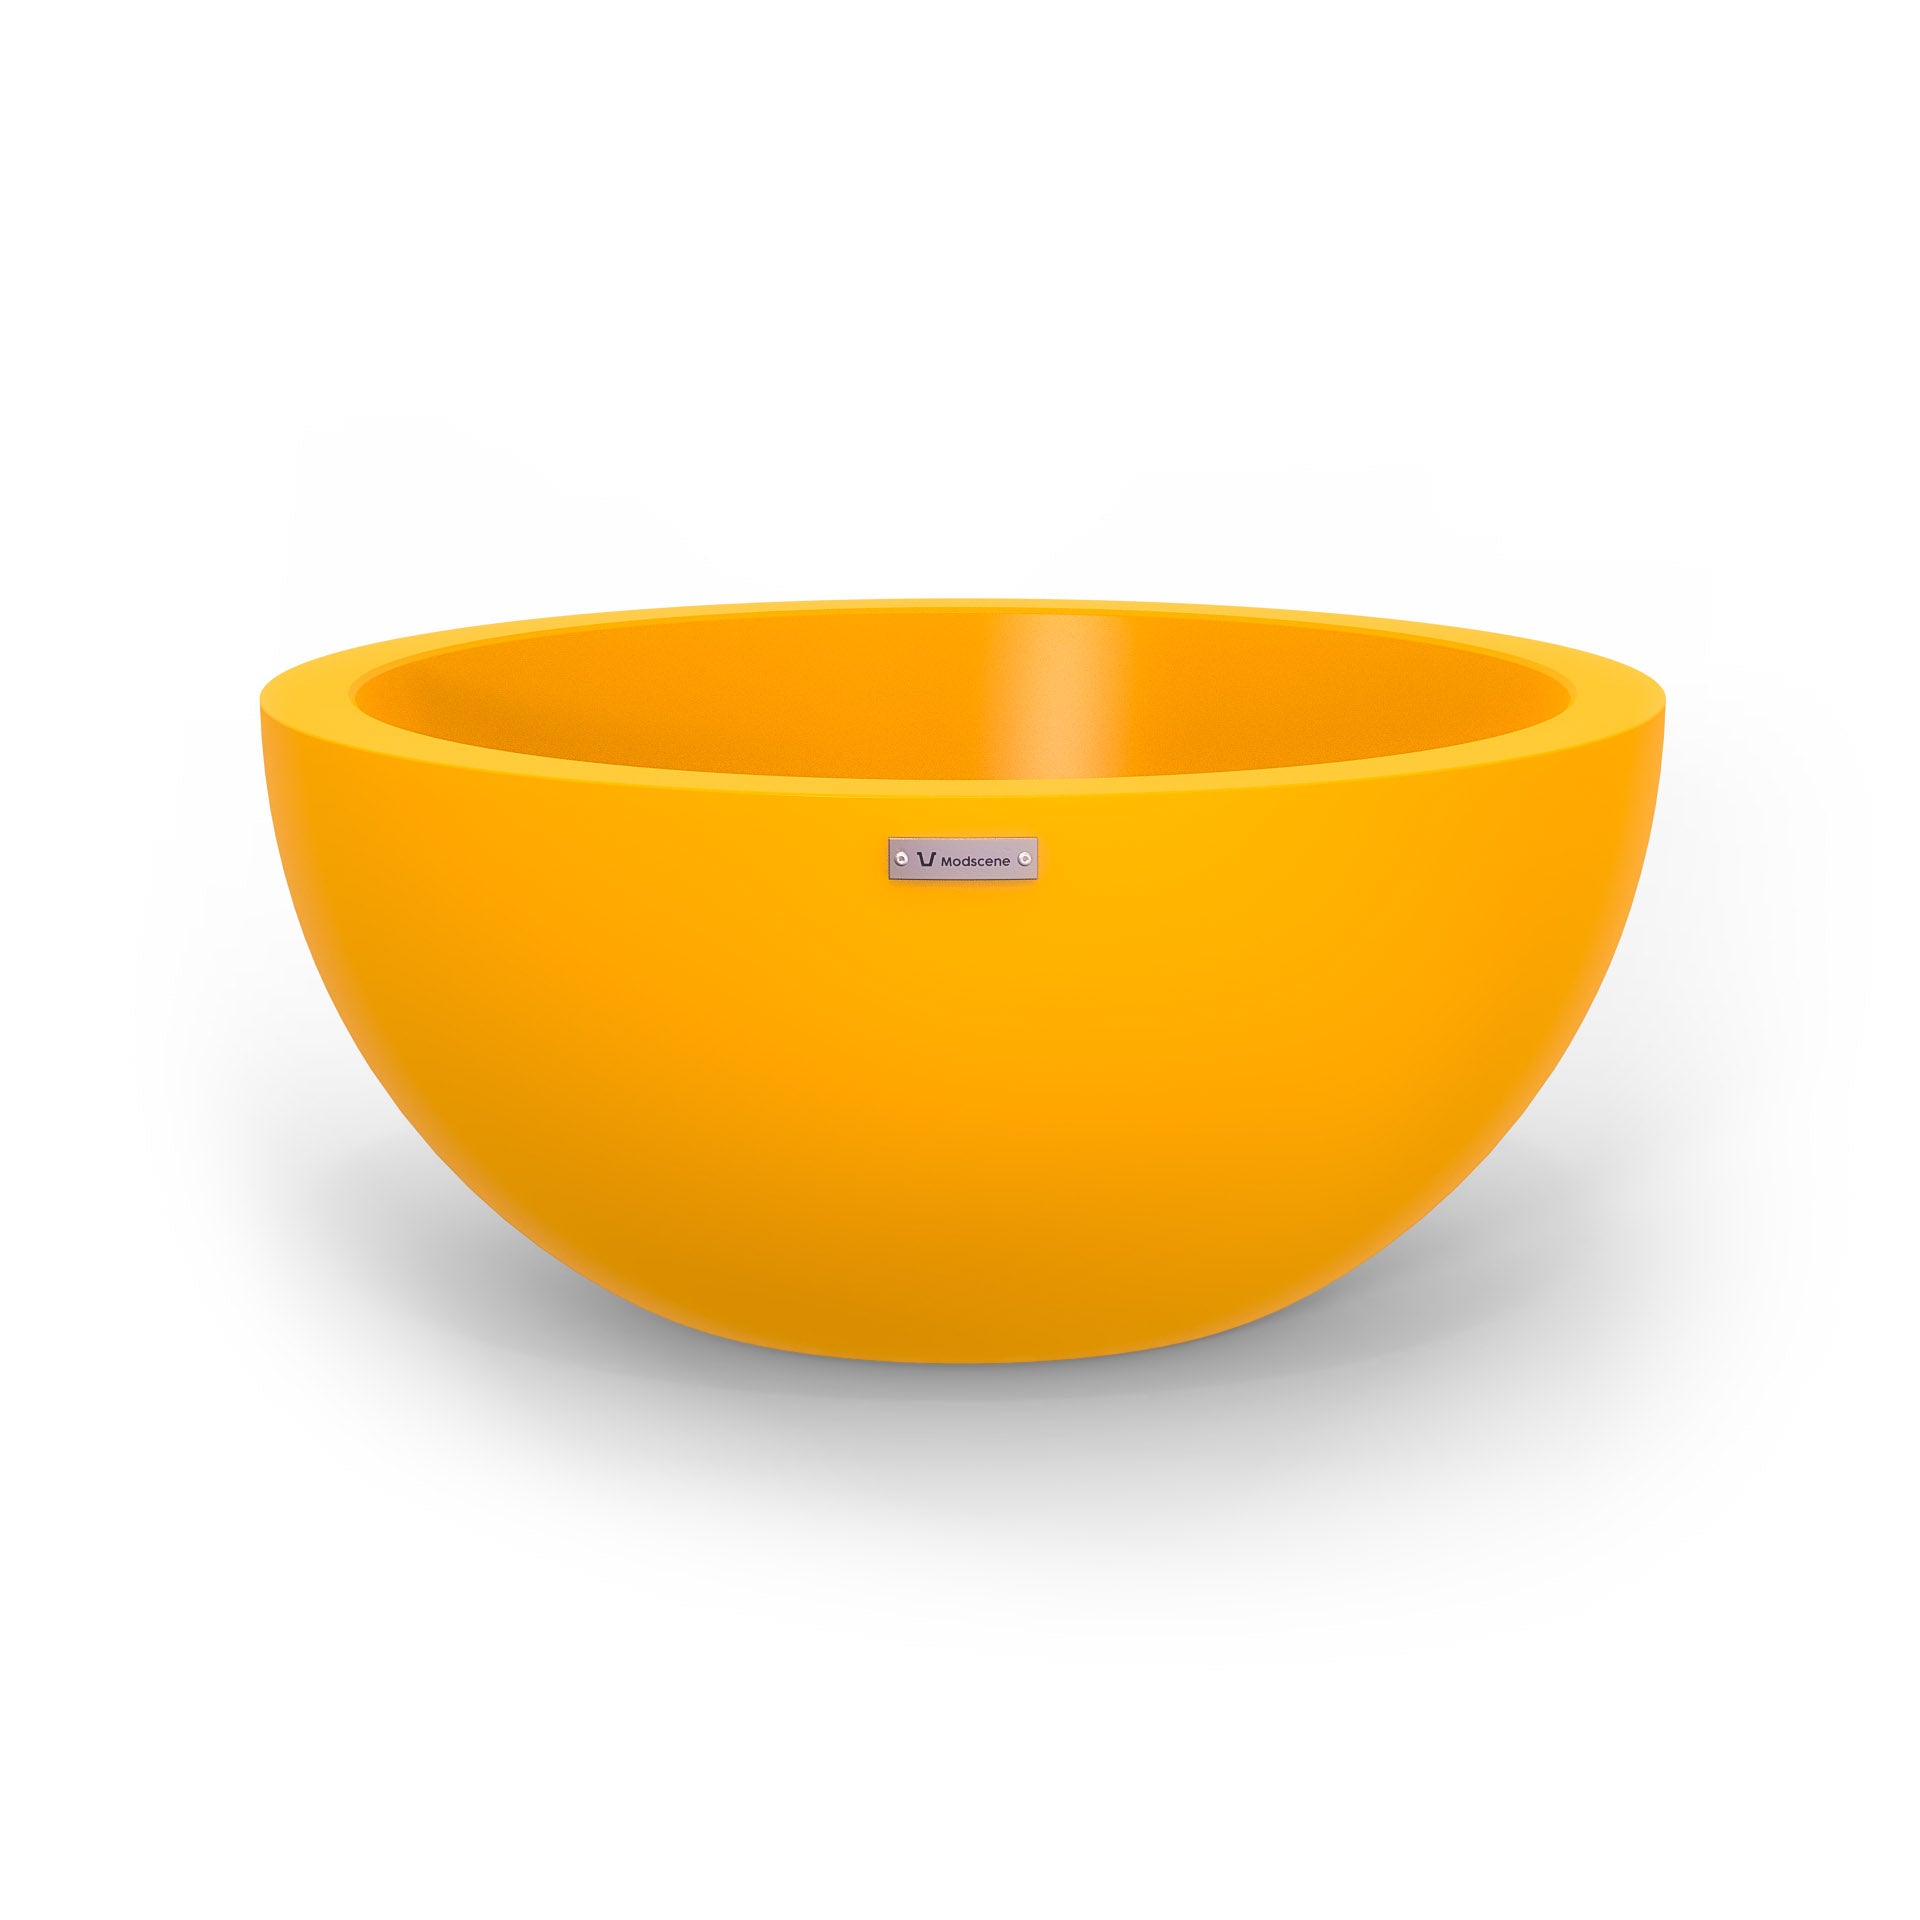 A large yellow planter bowl in yellow made by Modscene.